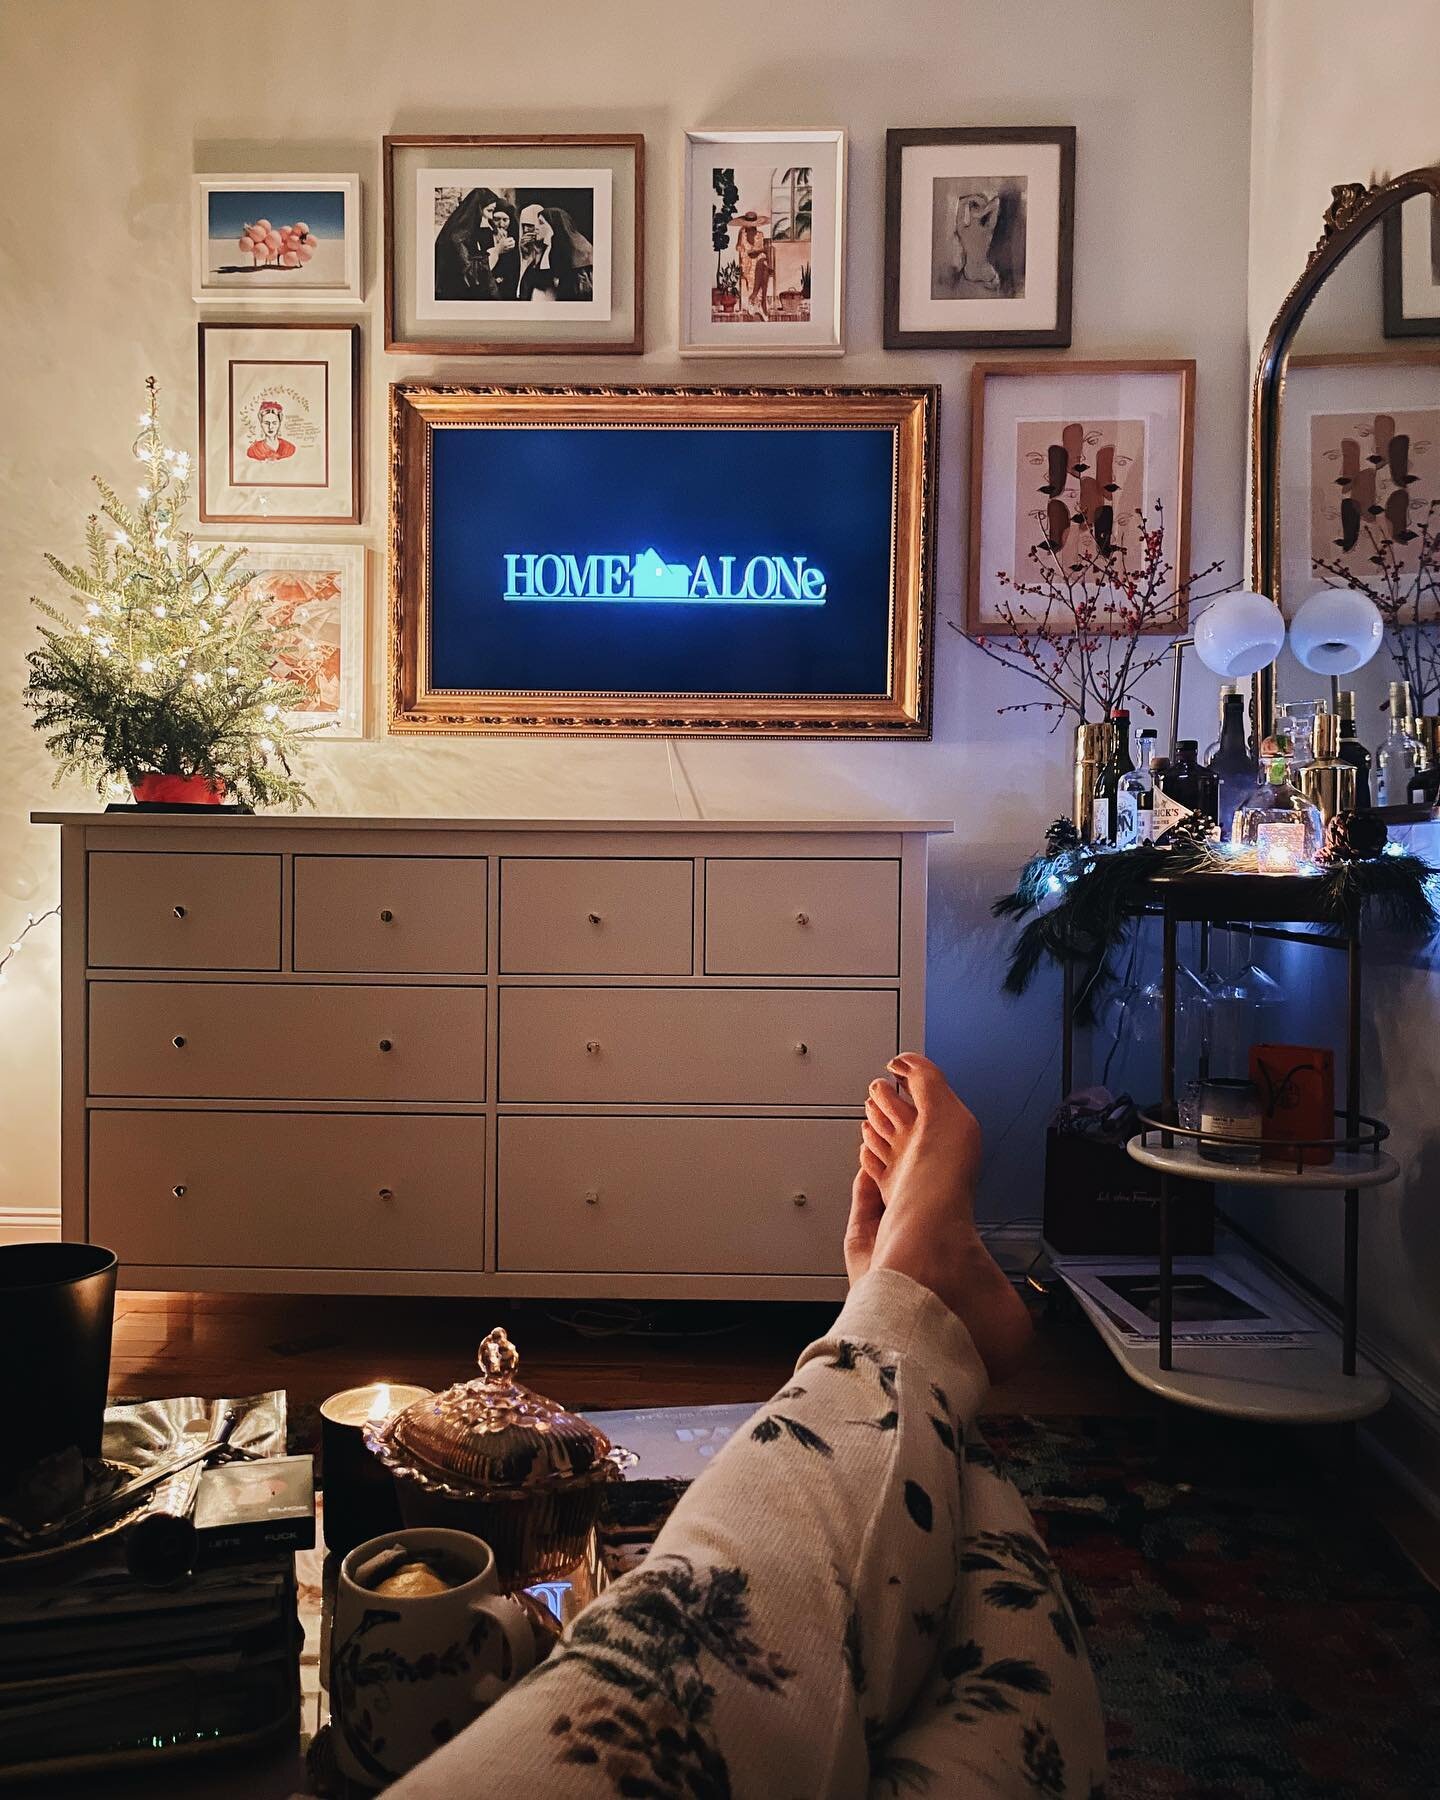 last night: home alone ✨ wish that the prelude to this holiday season was feeling a bit more cheery, but the reality is that the emotional rollercoaster of *to stay or to go [literally anywhere]* is back in full effect
🏠
so grateful that we live in 